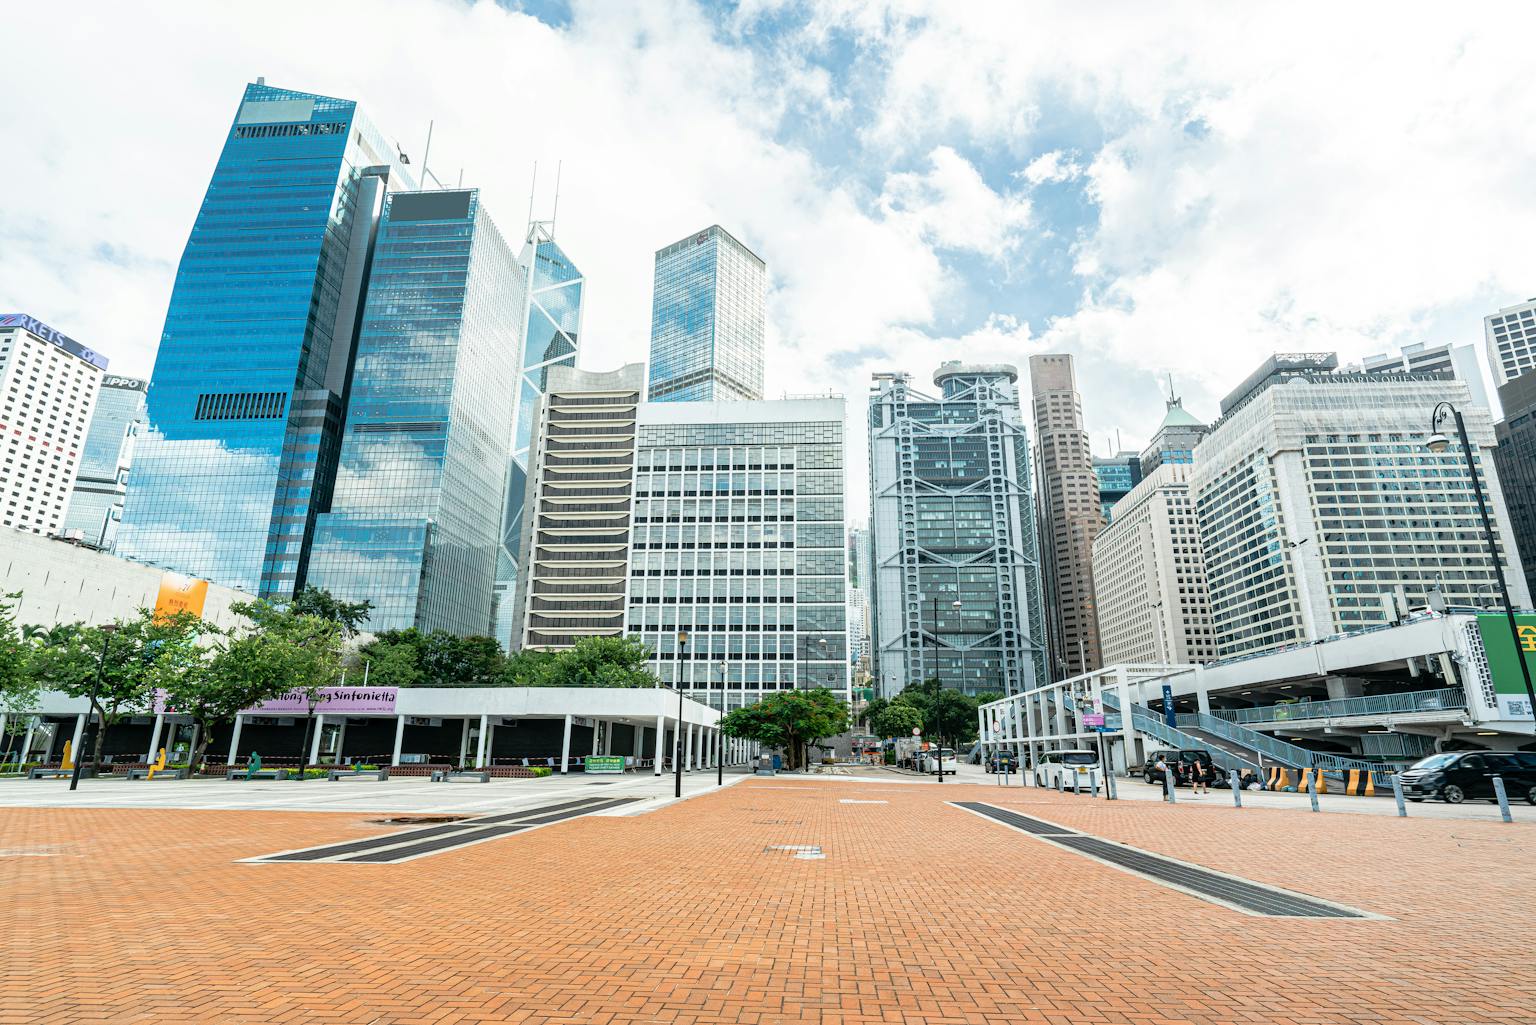 The condemned Star Ferry Car Park, on the right, faces Hong Kong's City Hall.